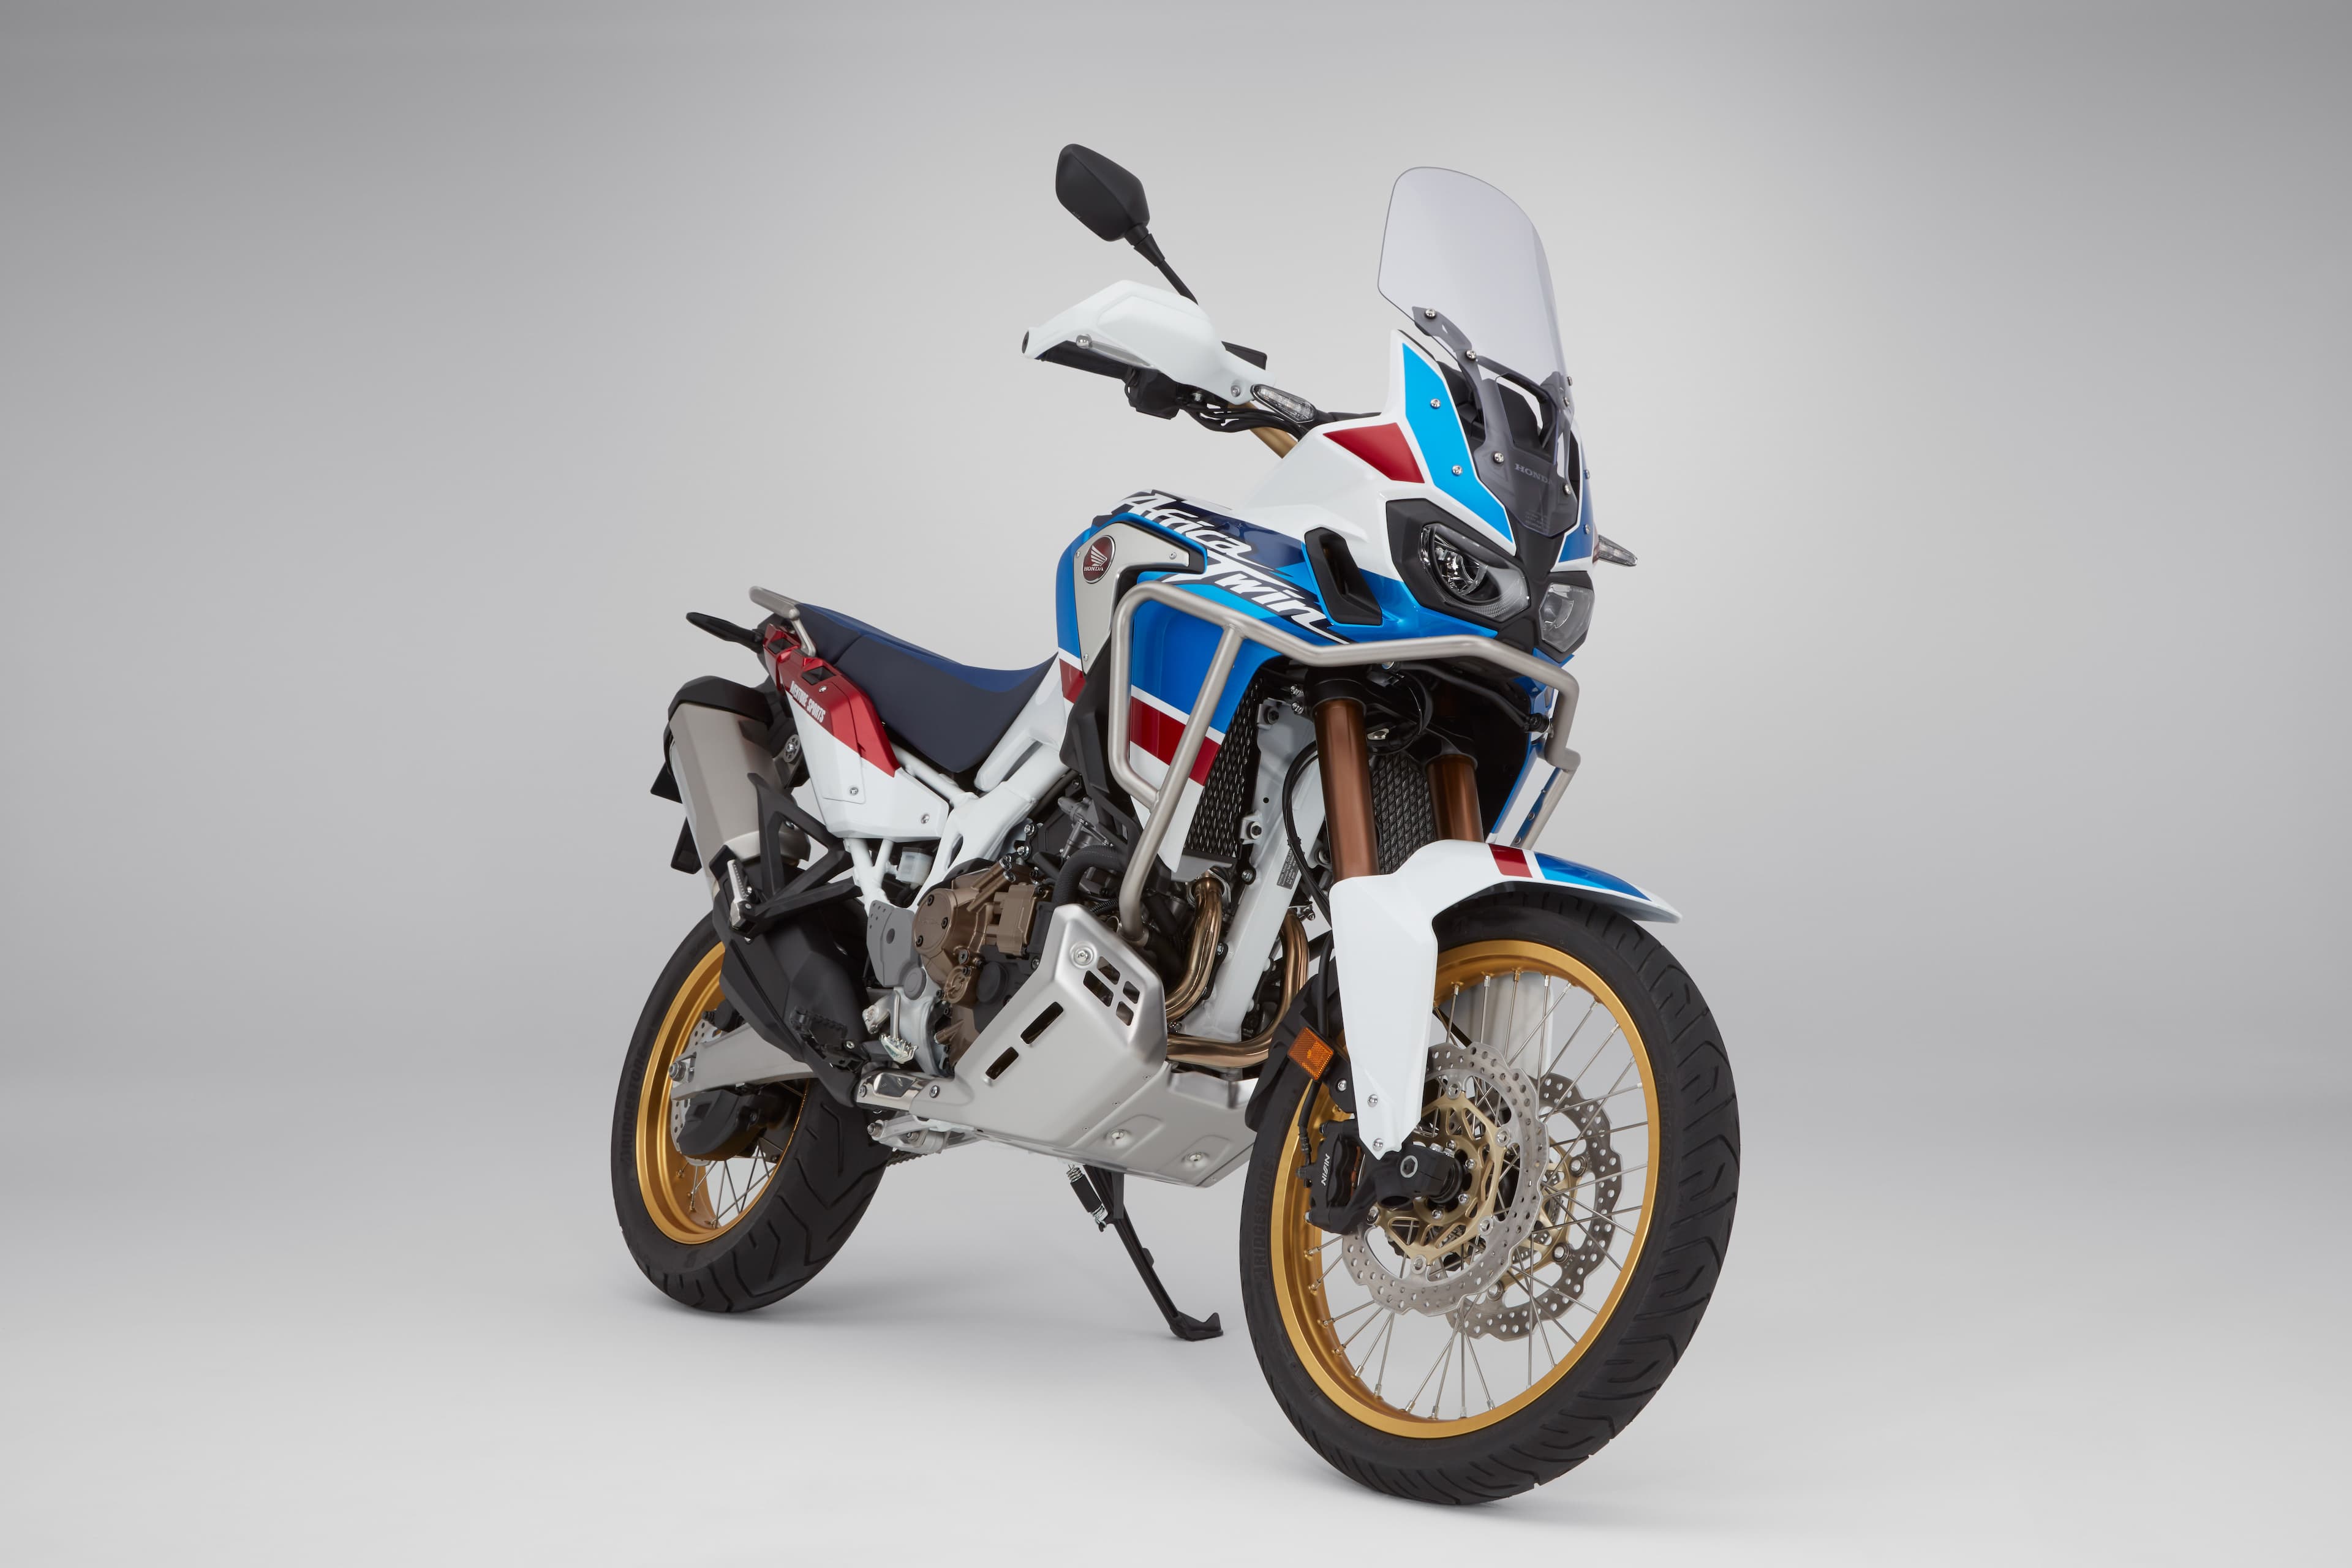 Honda Introduces the 2018 Africa Twin Adventure Sports